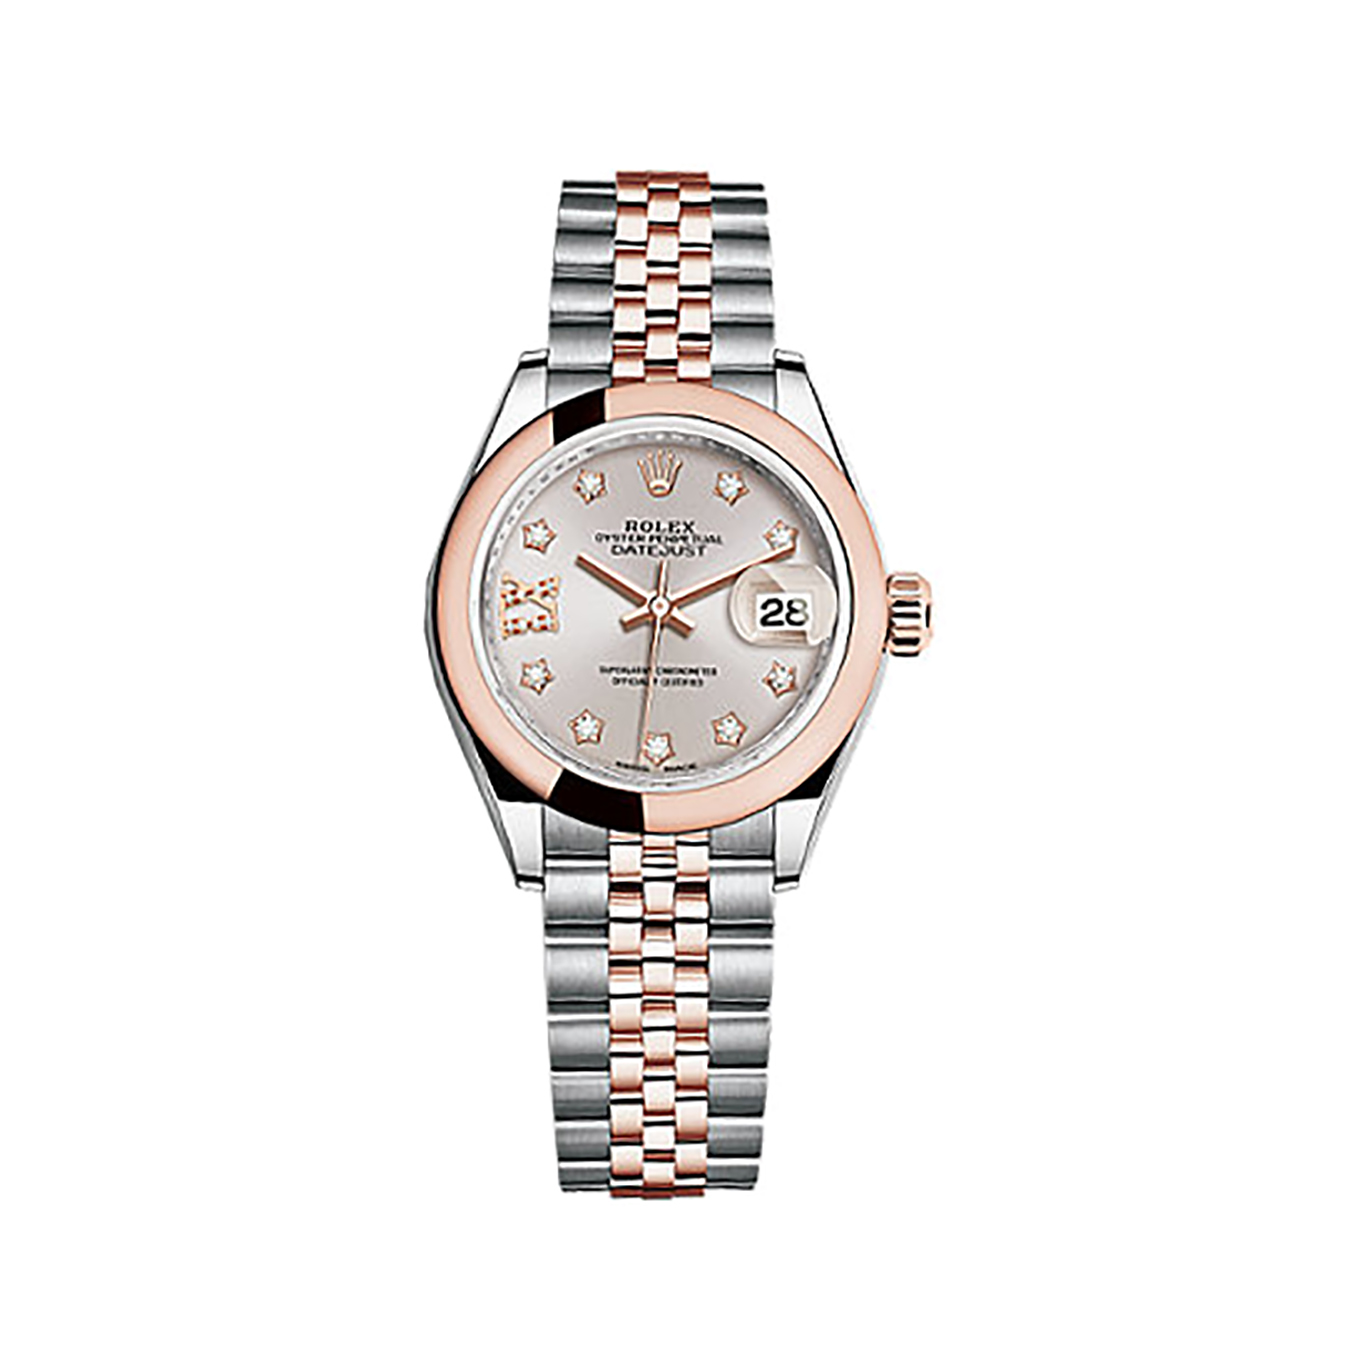 Lady-Datejust 28 279161 Rose Gold & Stainless Steel Watch (Sundust Set with Diamonds)